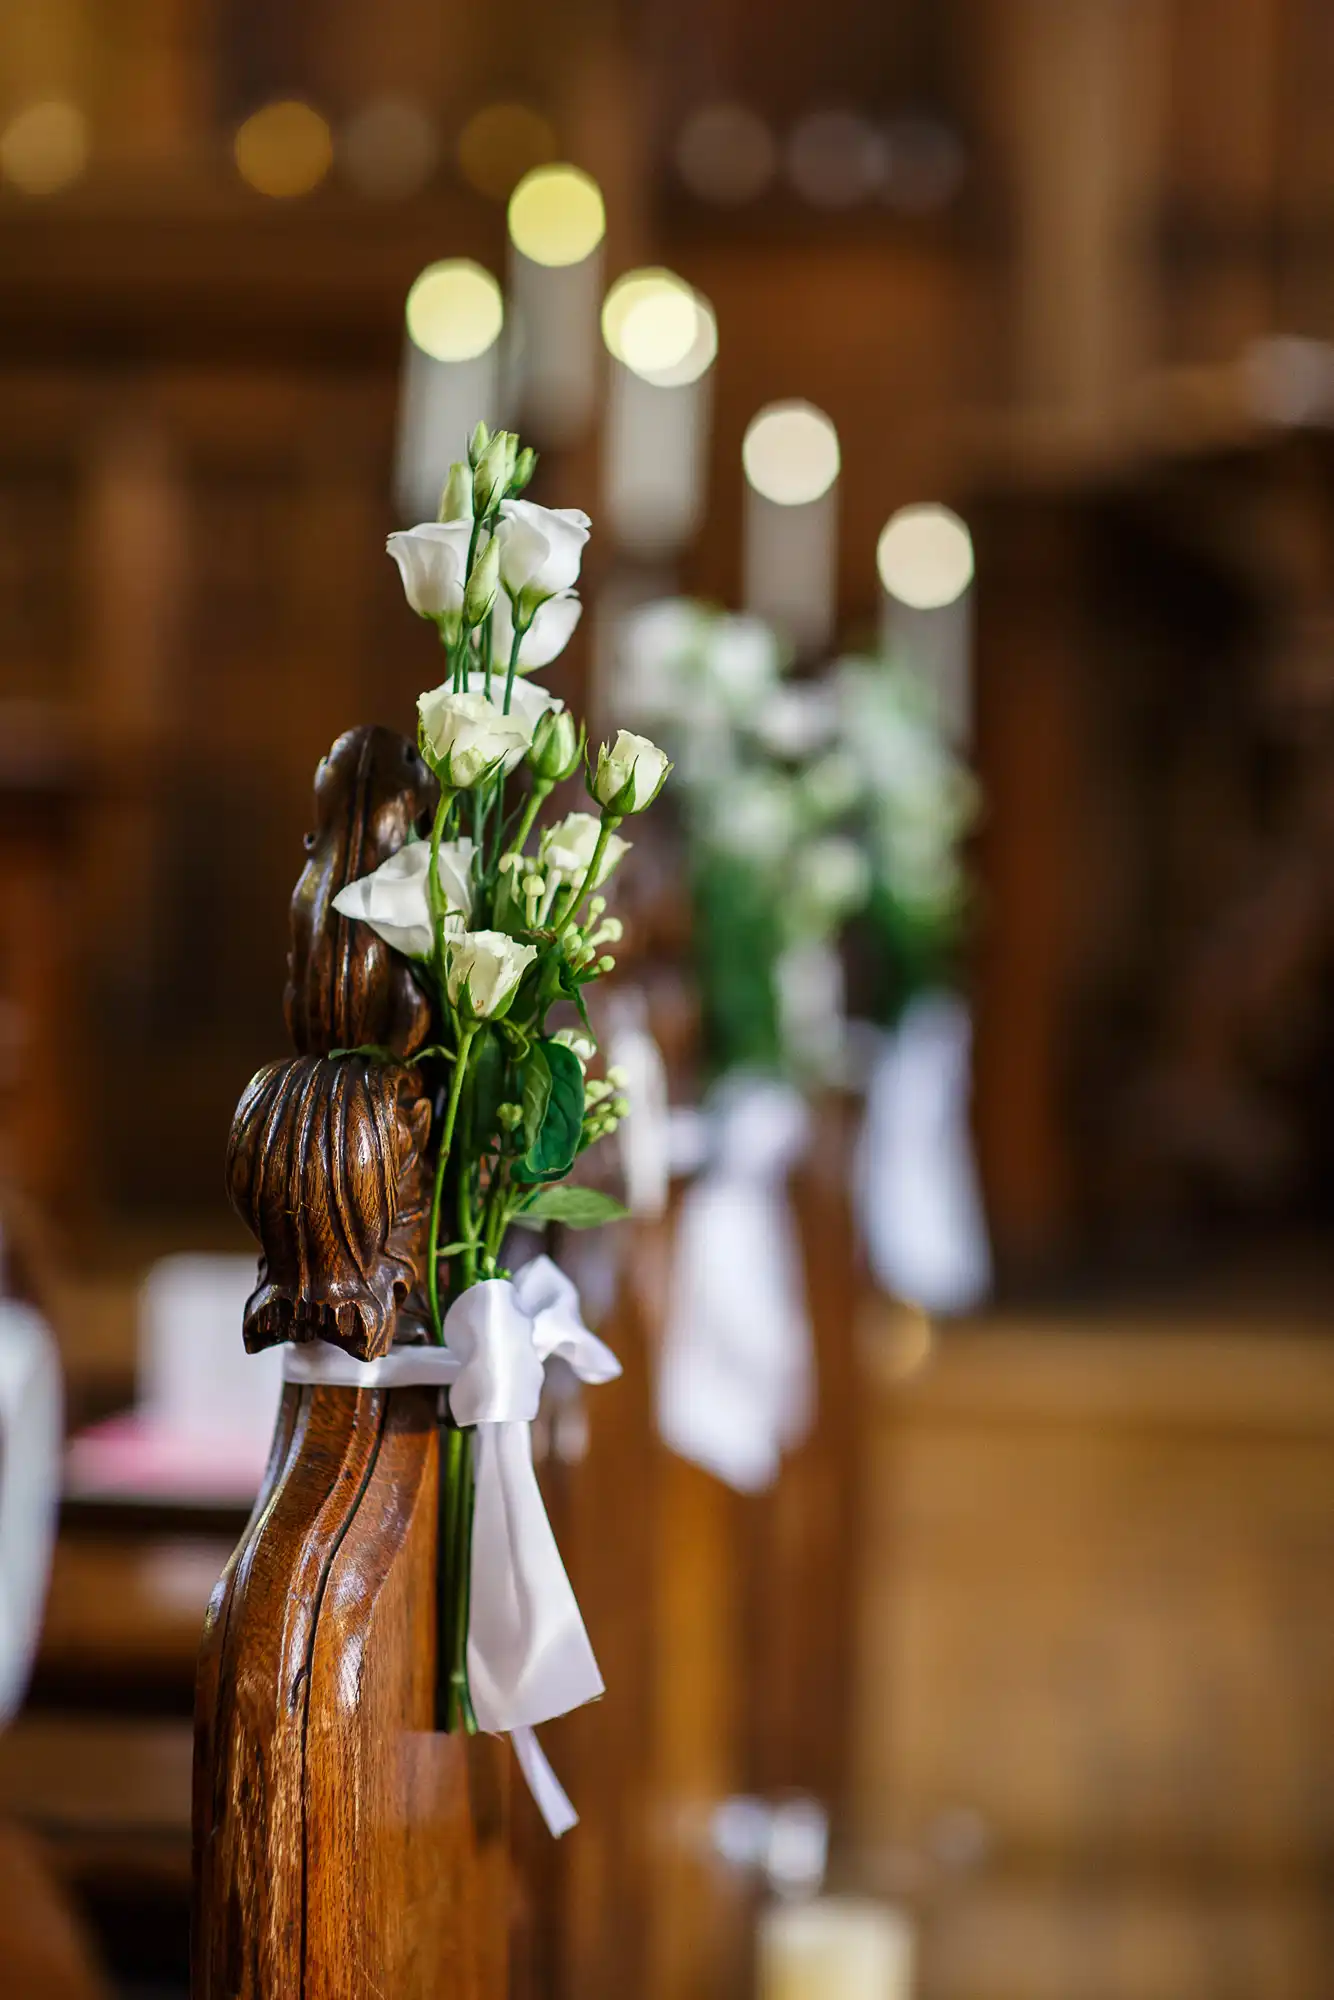 White flowers and ribbons decorate wooden pews in a church, with blurred background highlighting the interior architecture.